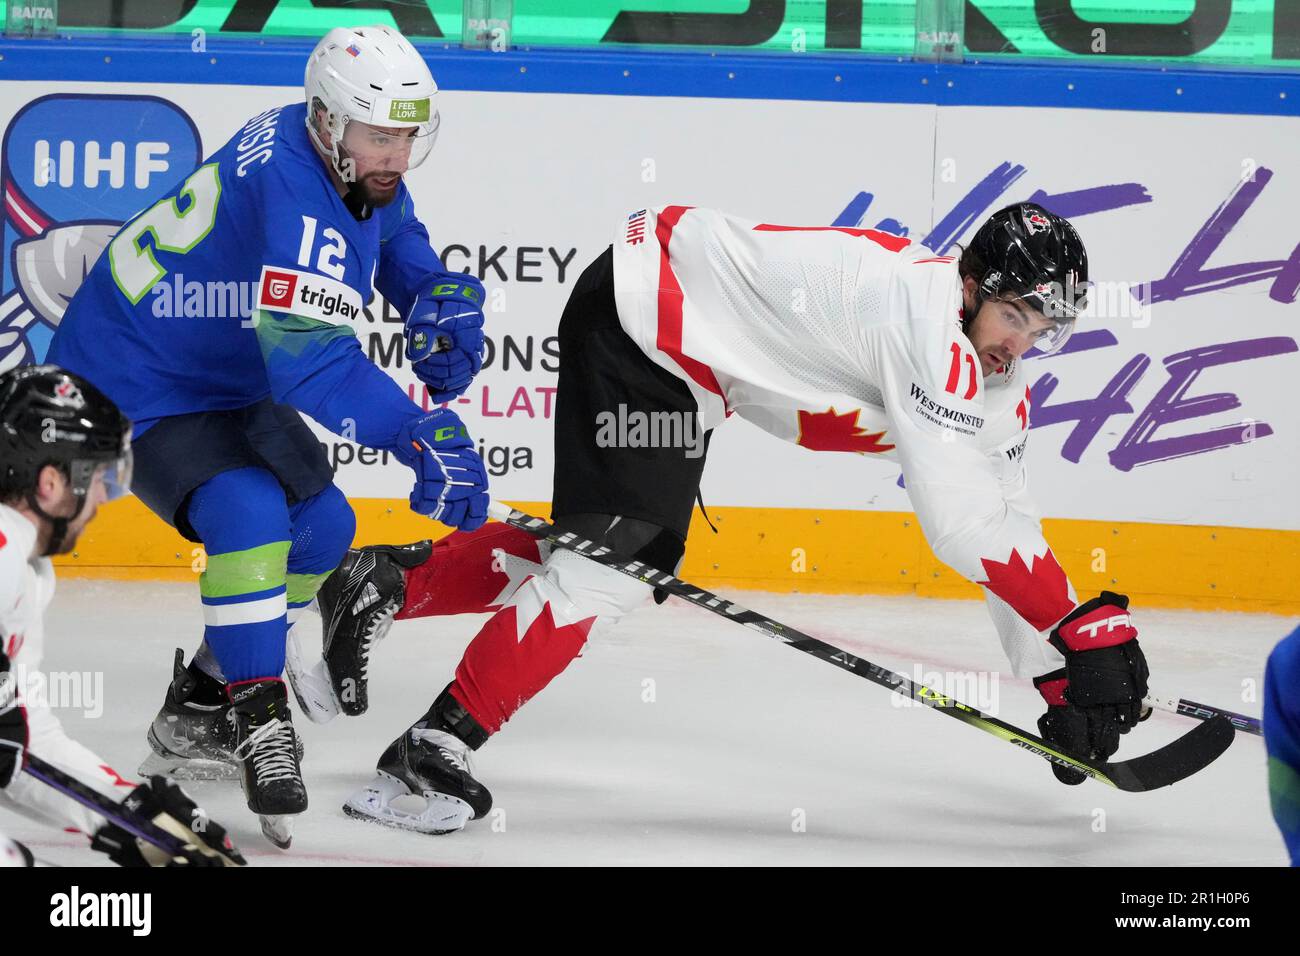 Nik Simsic of Slovenia, left, fights for a puck with Jack McBain of Canada  during the group B match between Slovenia and Canada at the ice hockey  world championship in Riga, Latvia,